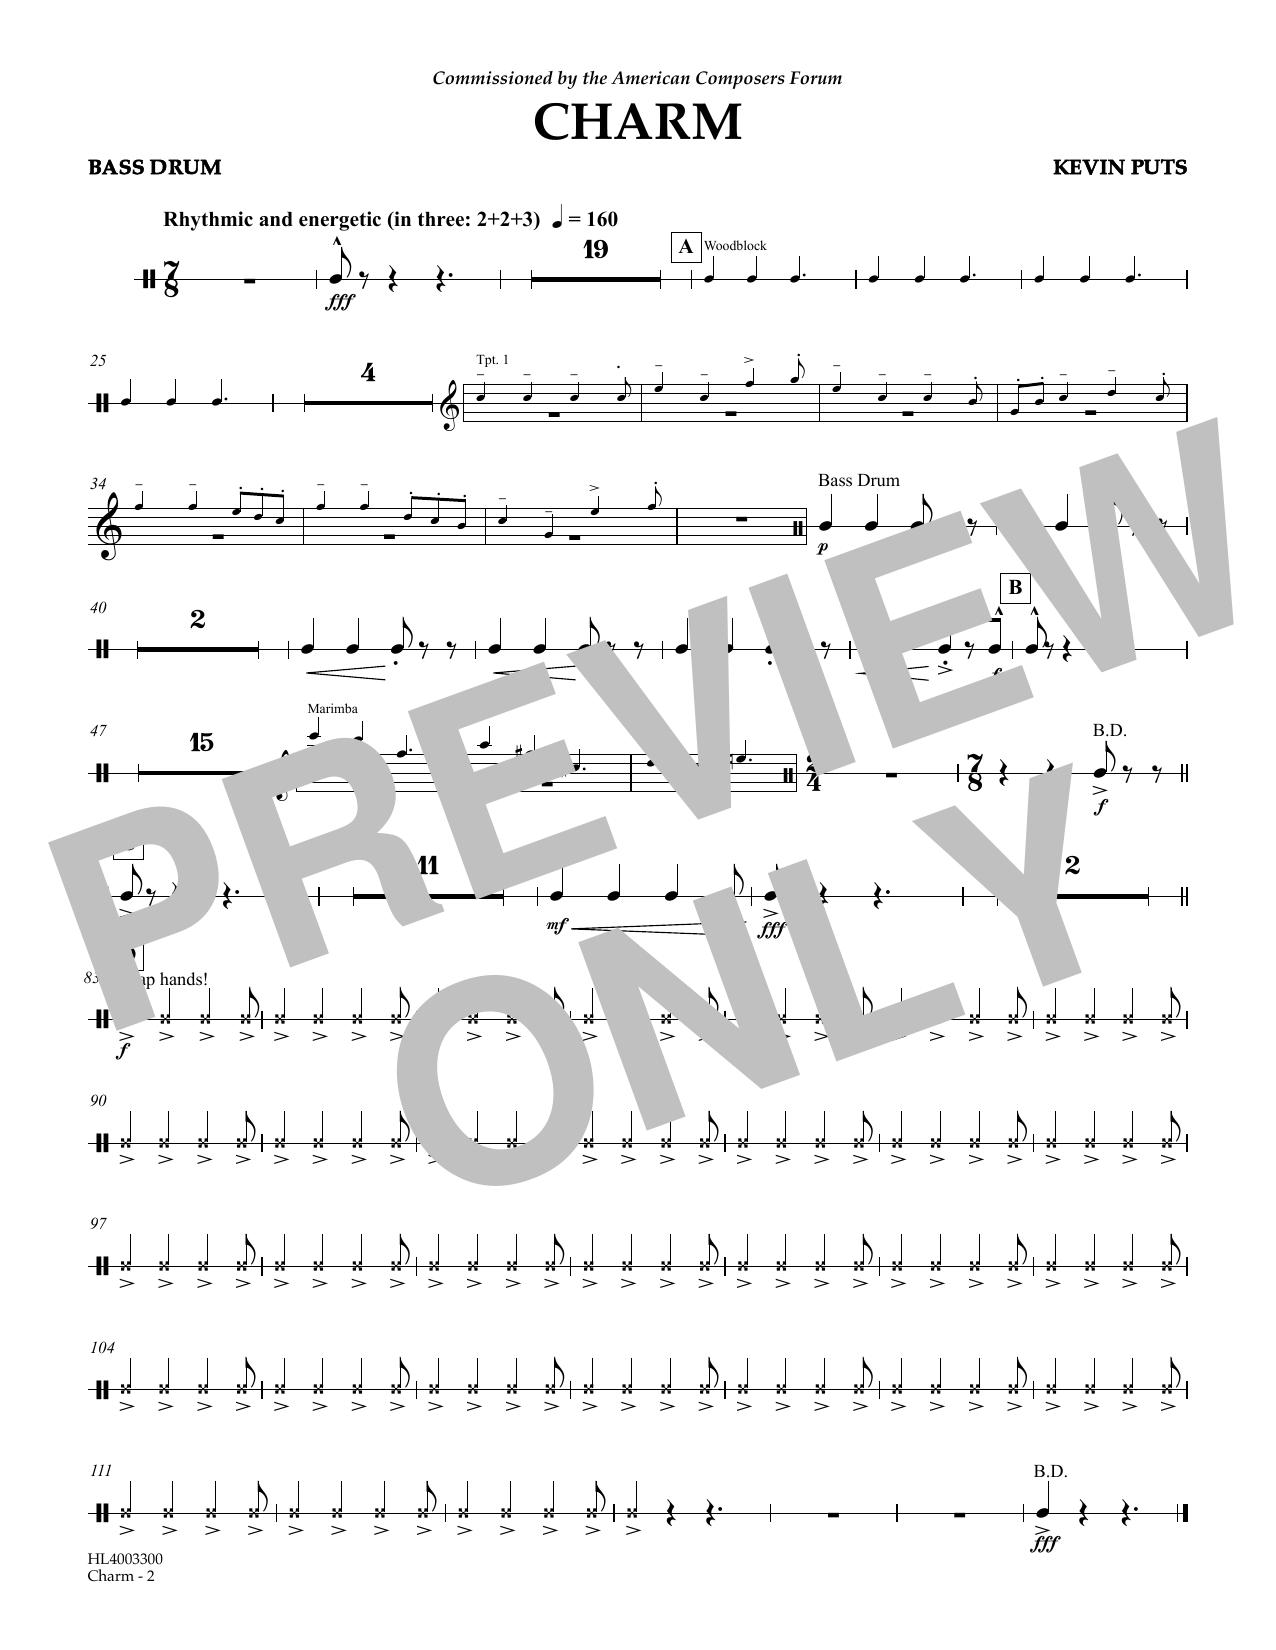 Download Kevin Puts Charm - Bass Drums Sheet Music